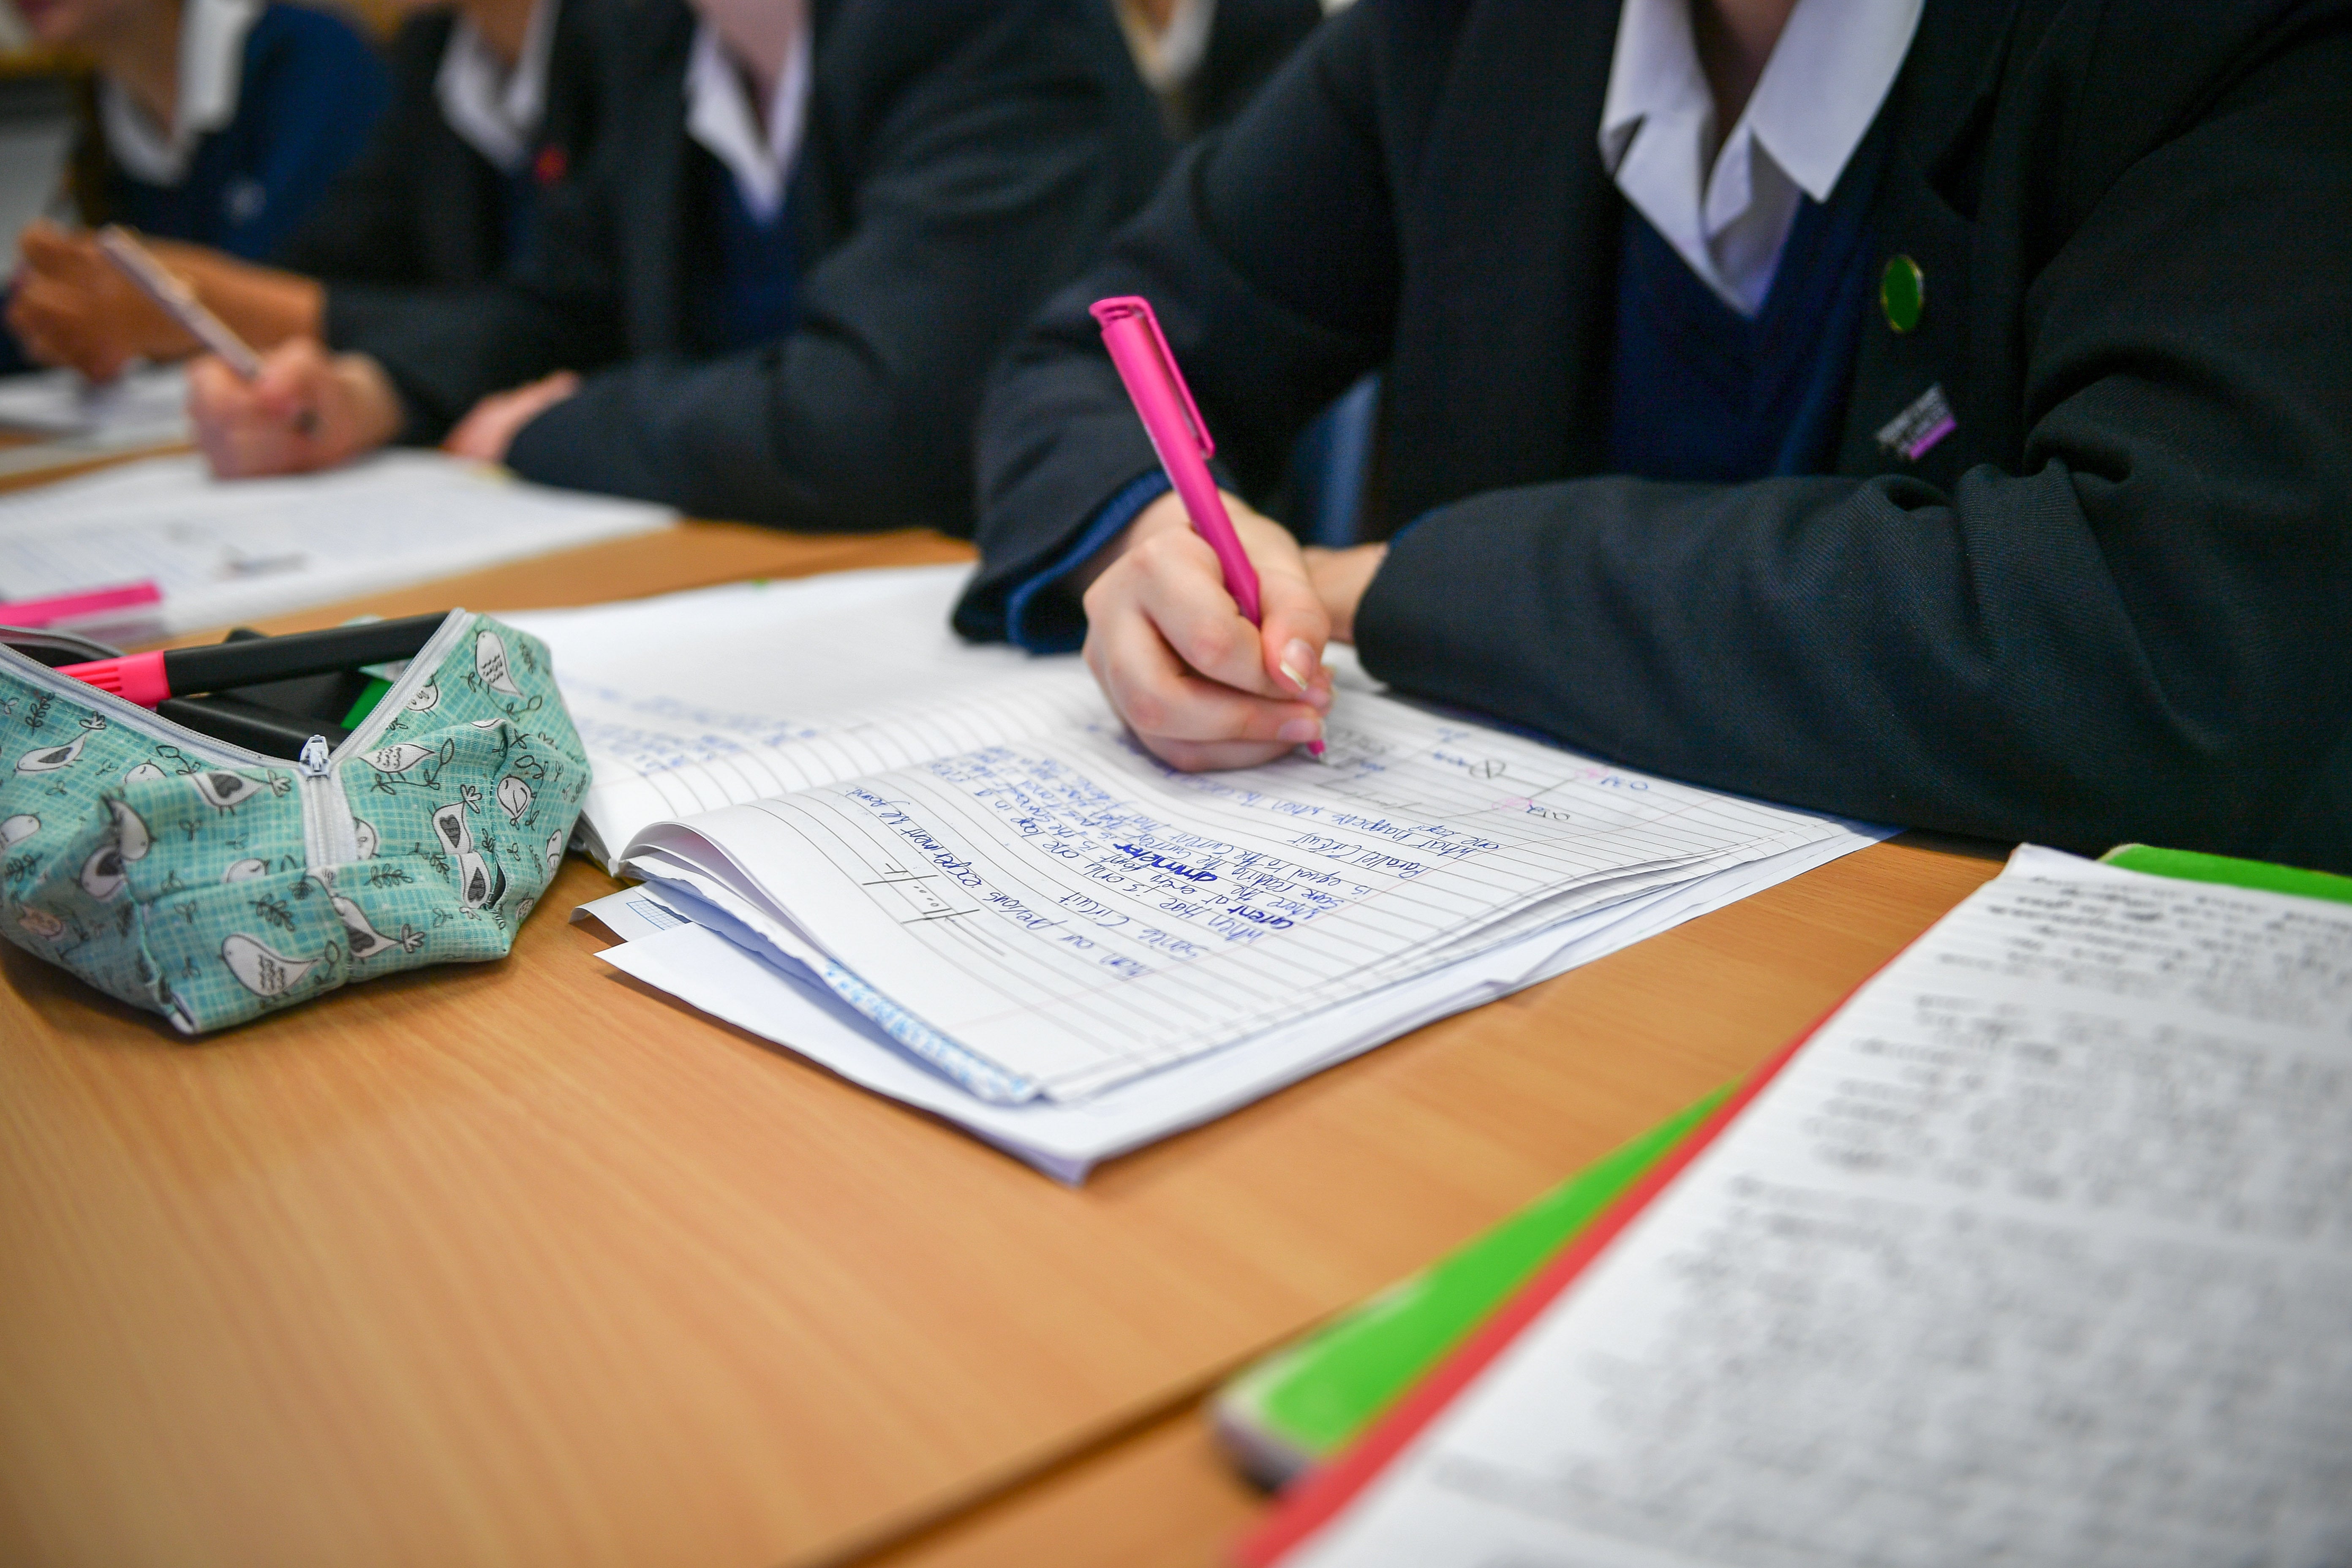 Concerns have been raised that some students may not feel they have a choice about their future